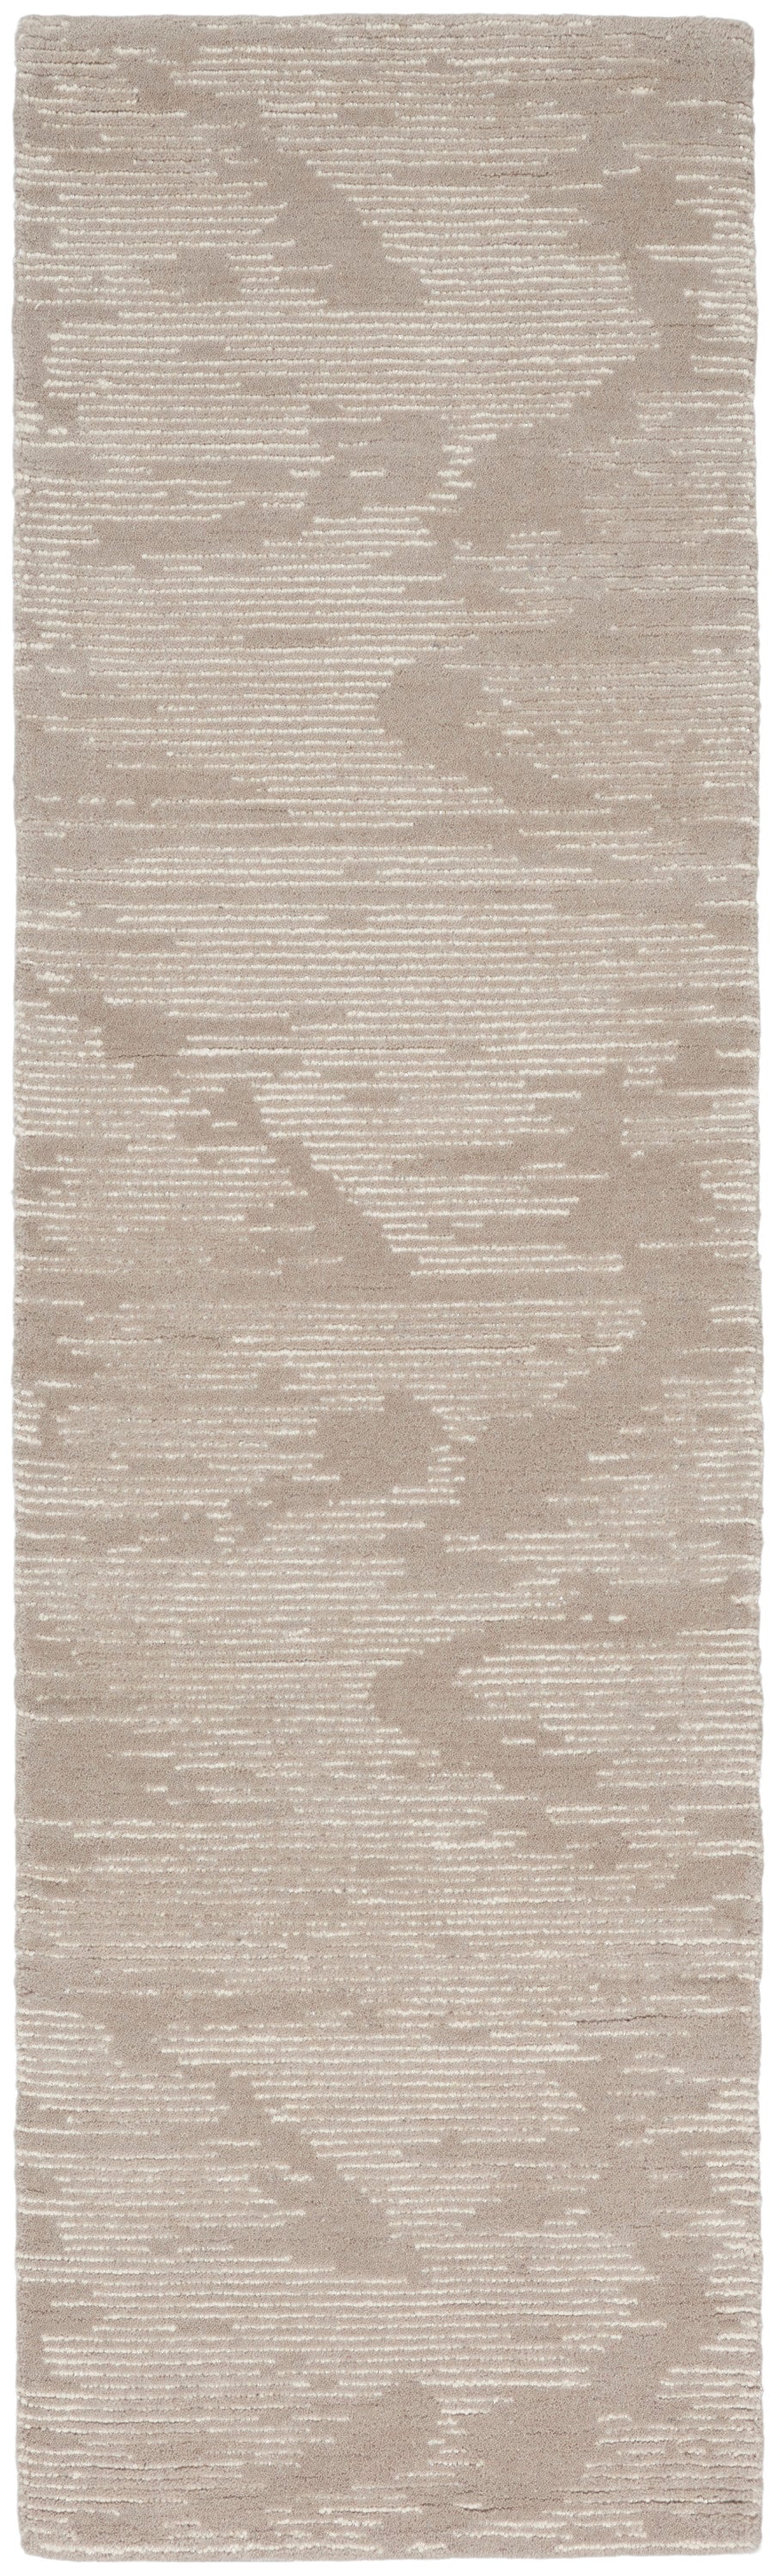 Michael Amini Ma30 Star SMR02 Taupe Ivory Contemporary Tufted Rug